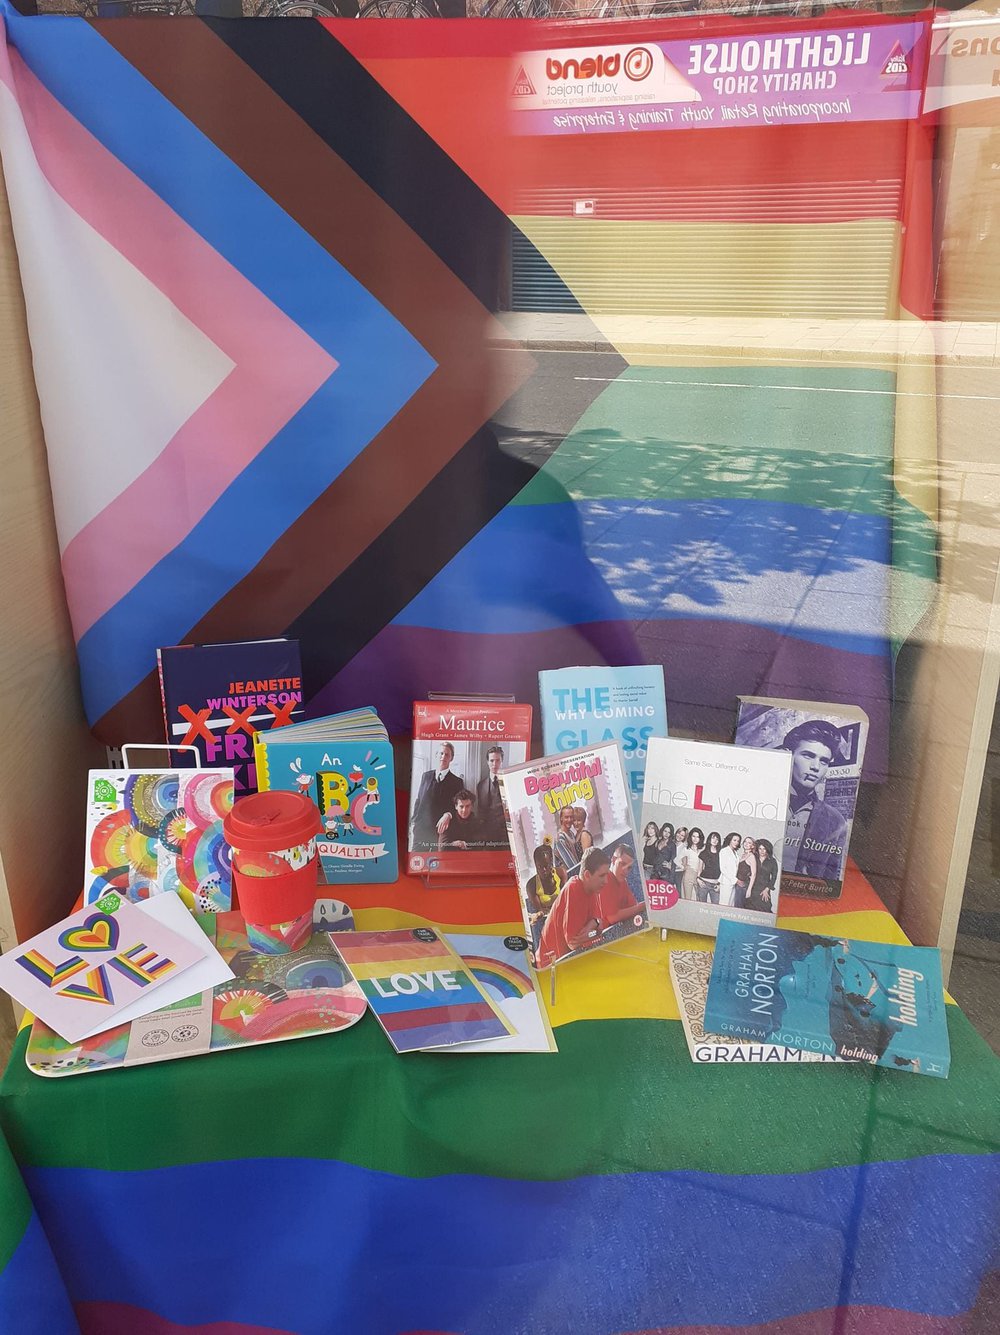 A Pride month shop window display with various books